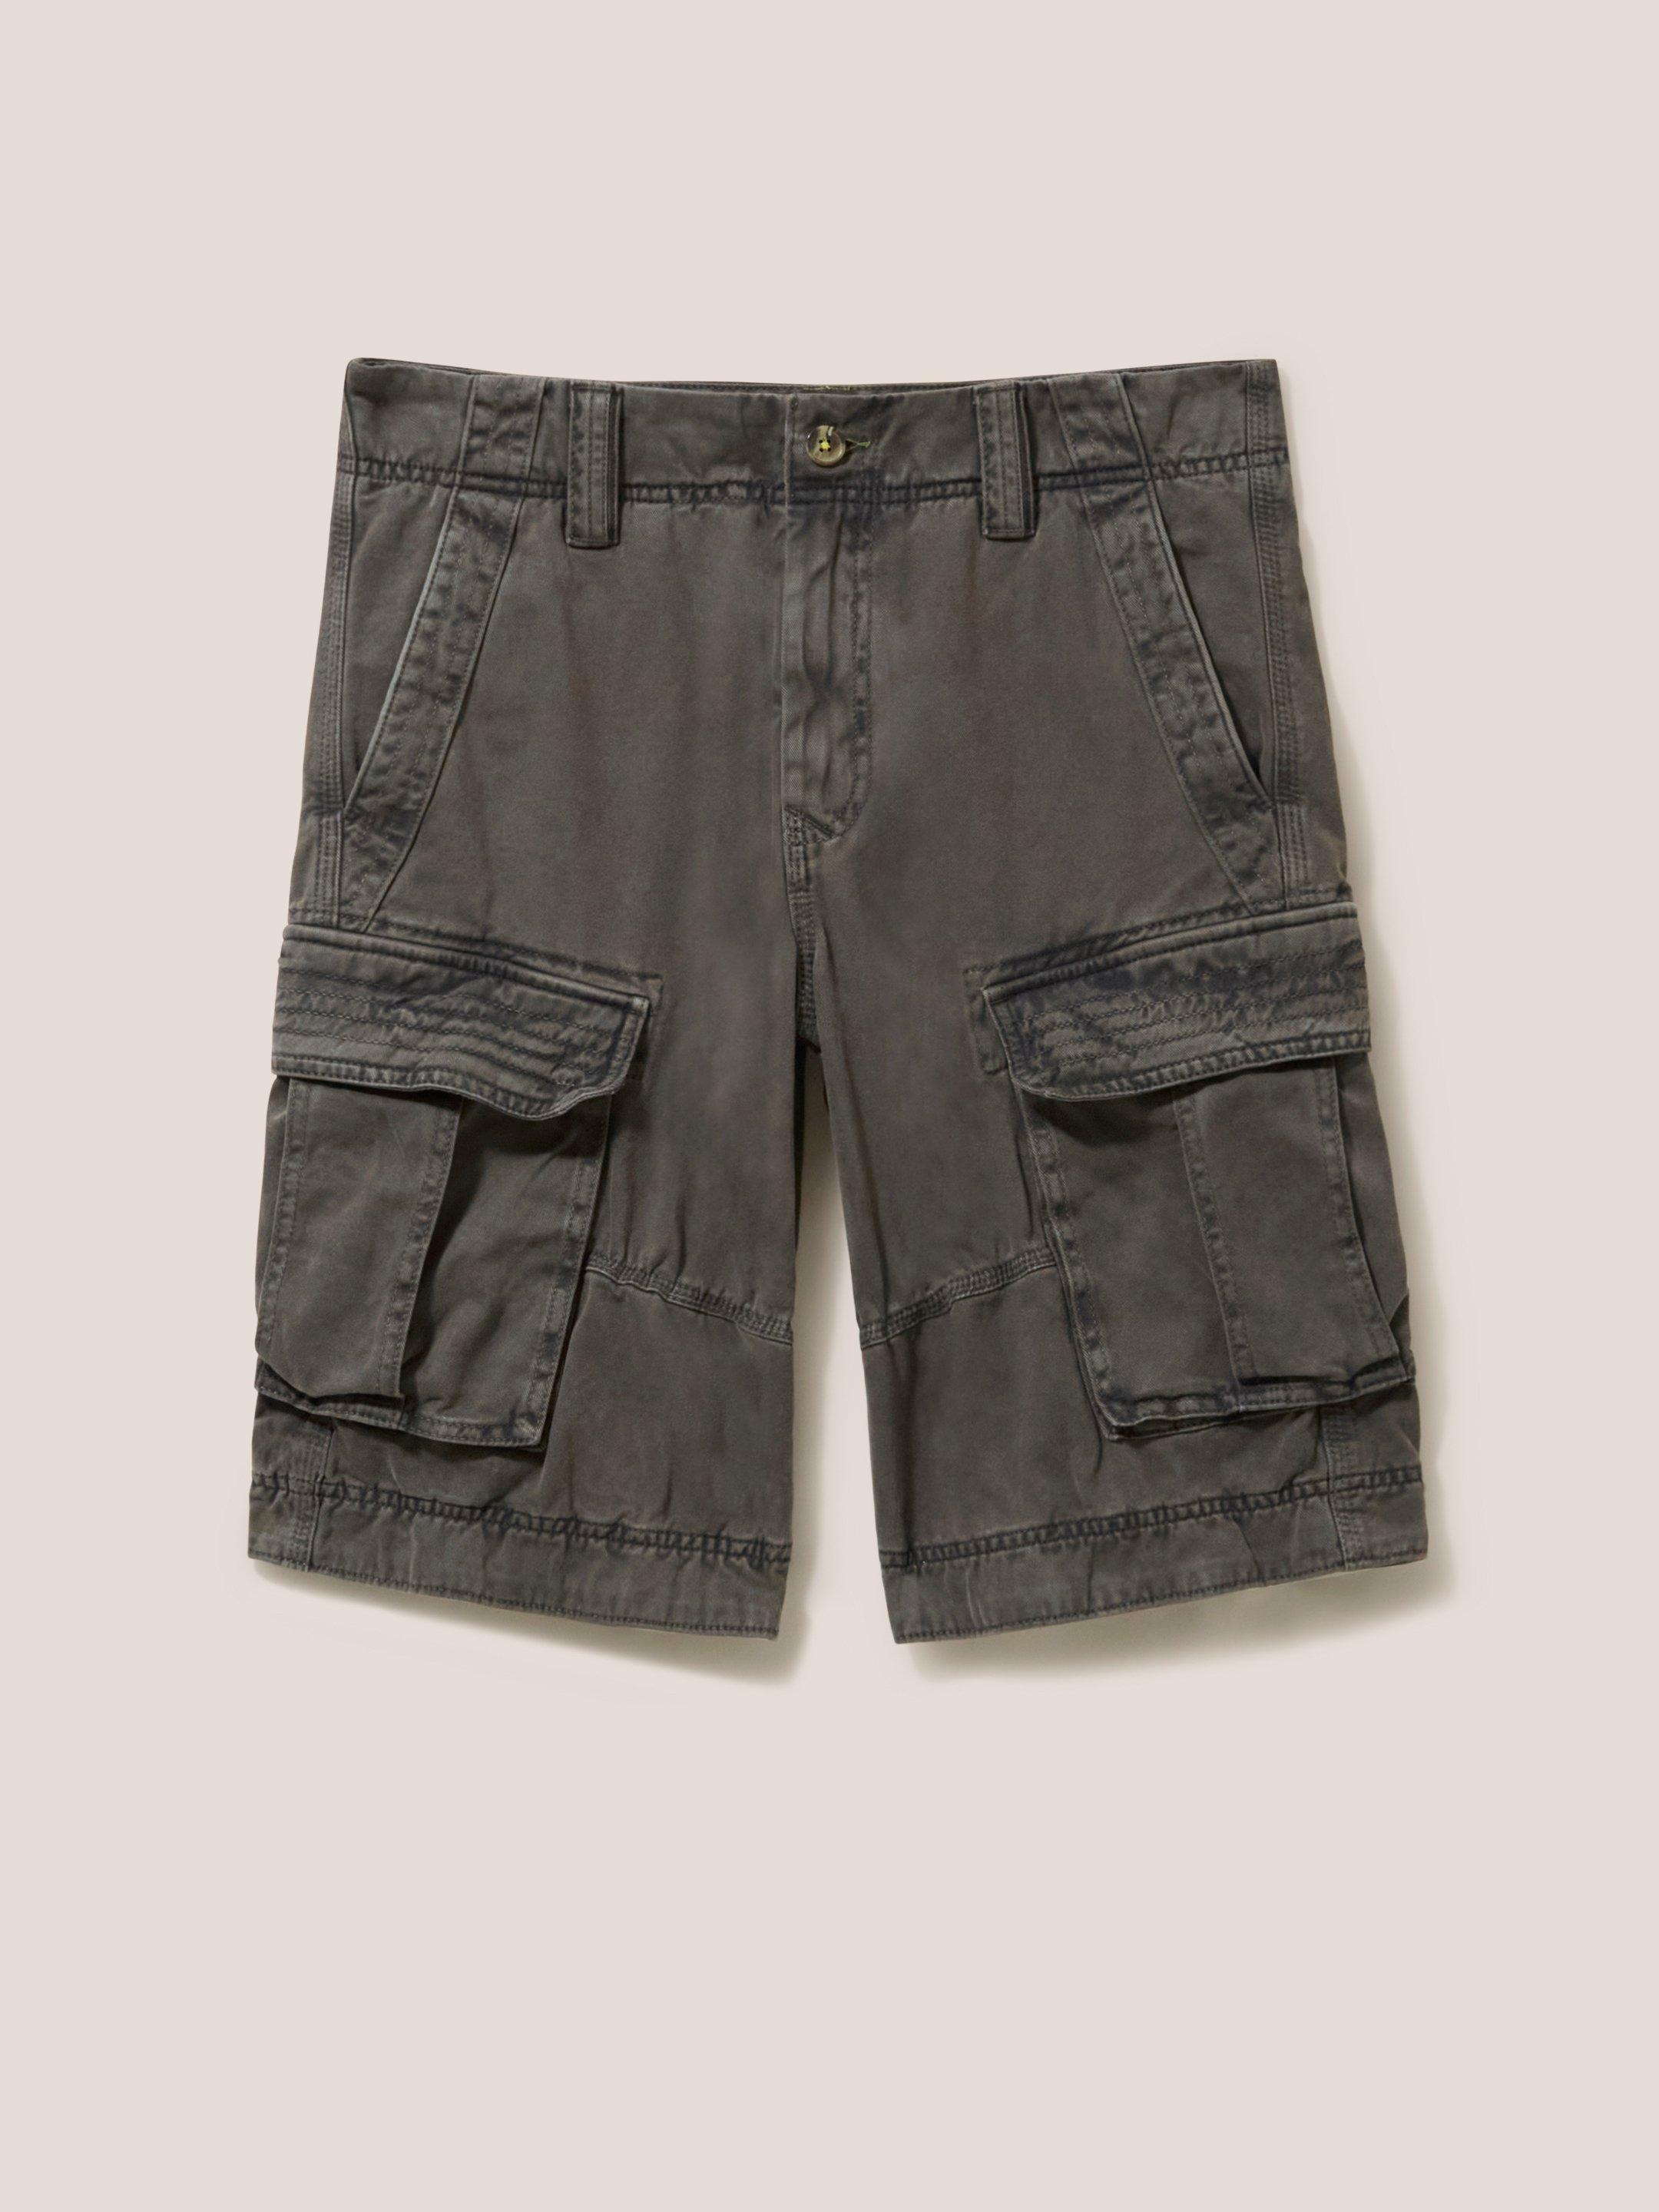 Halsall Organic Cargo Short in PURE BLK - FLAT FRONT